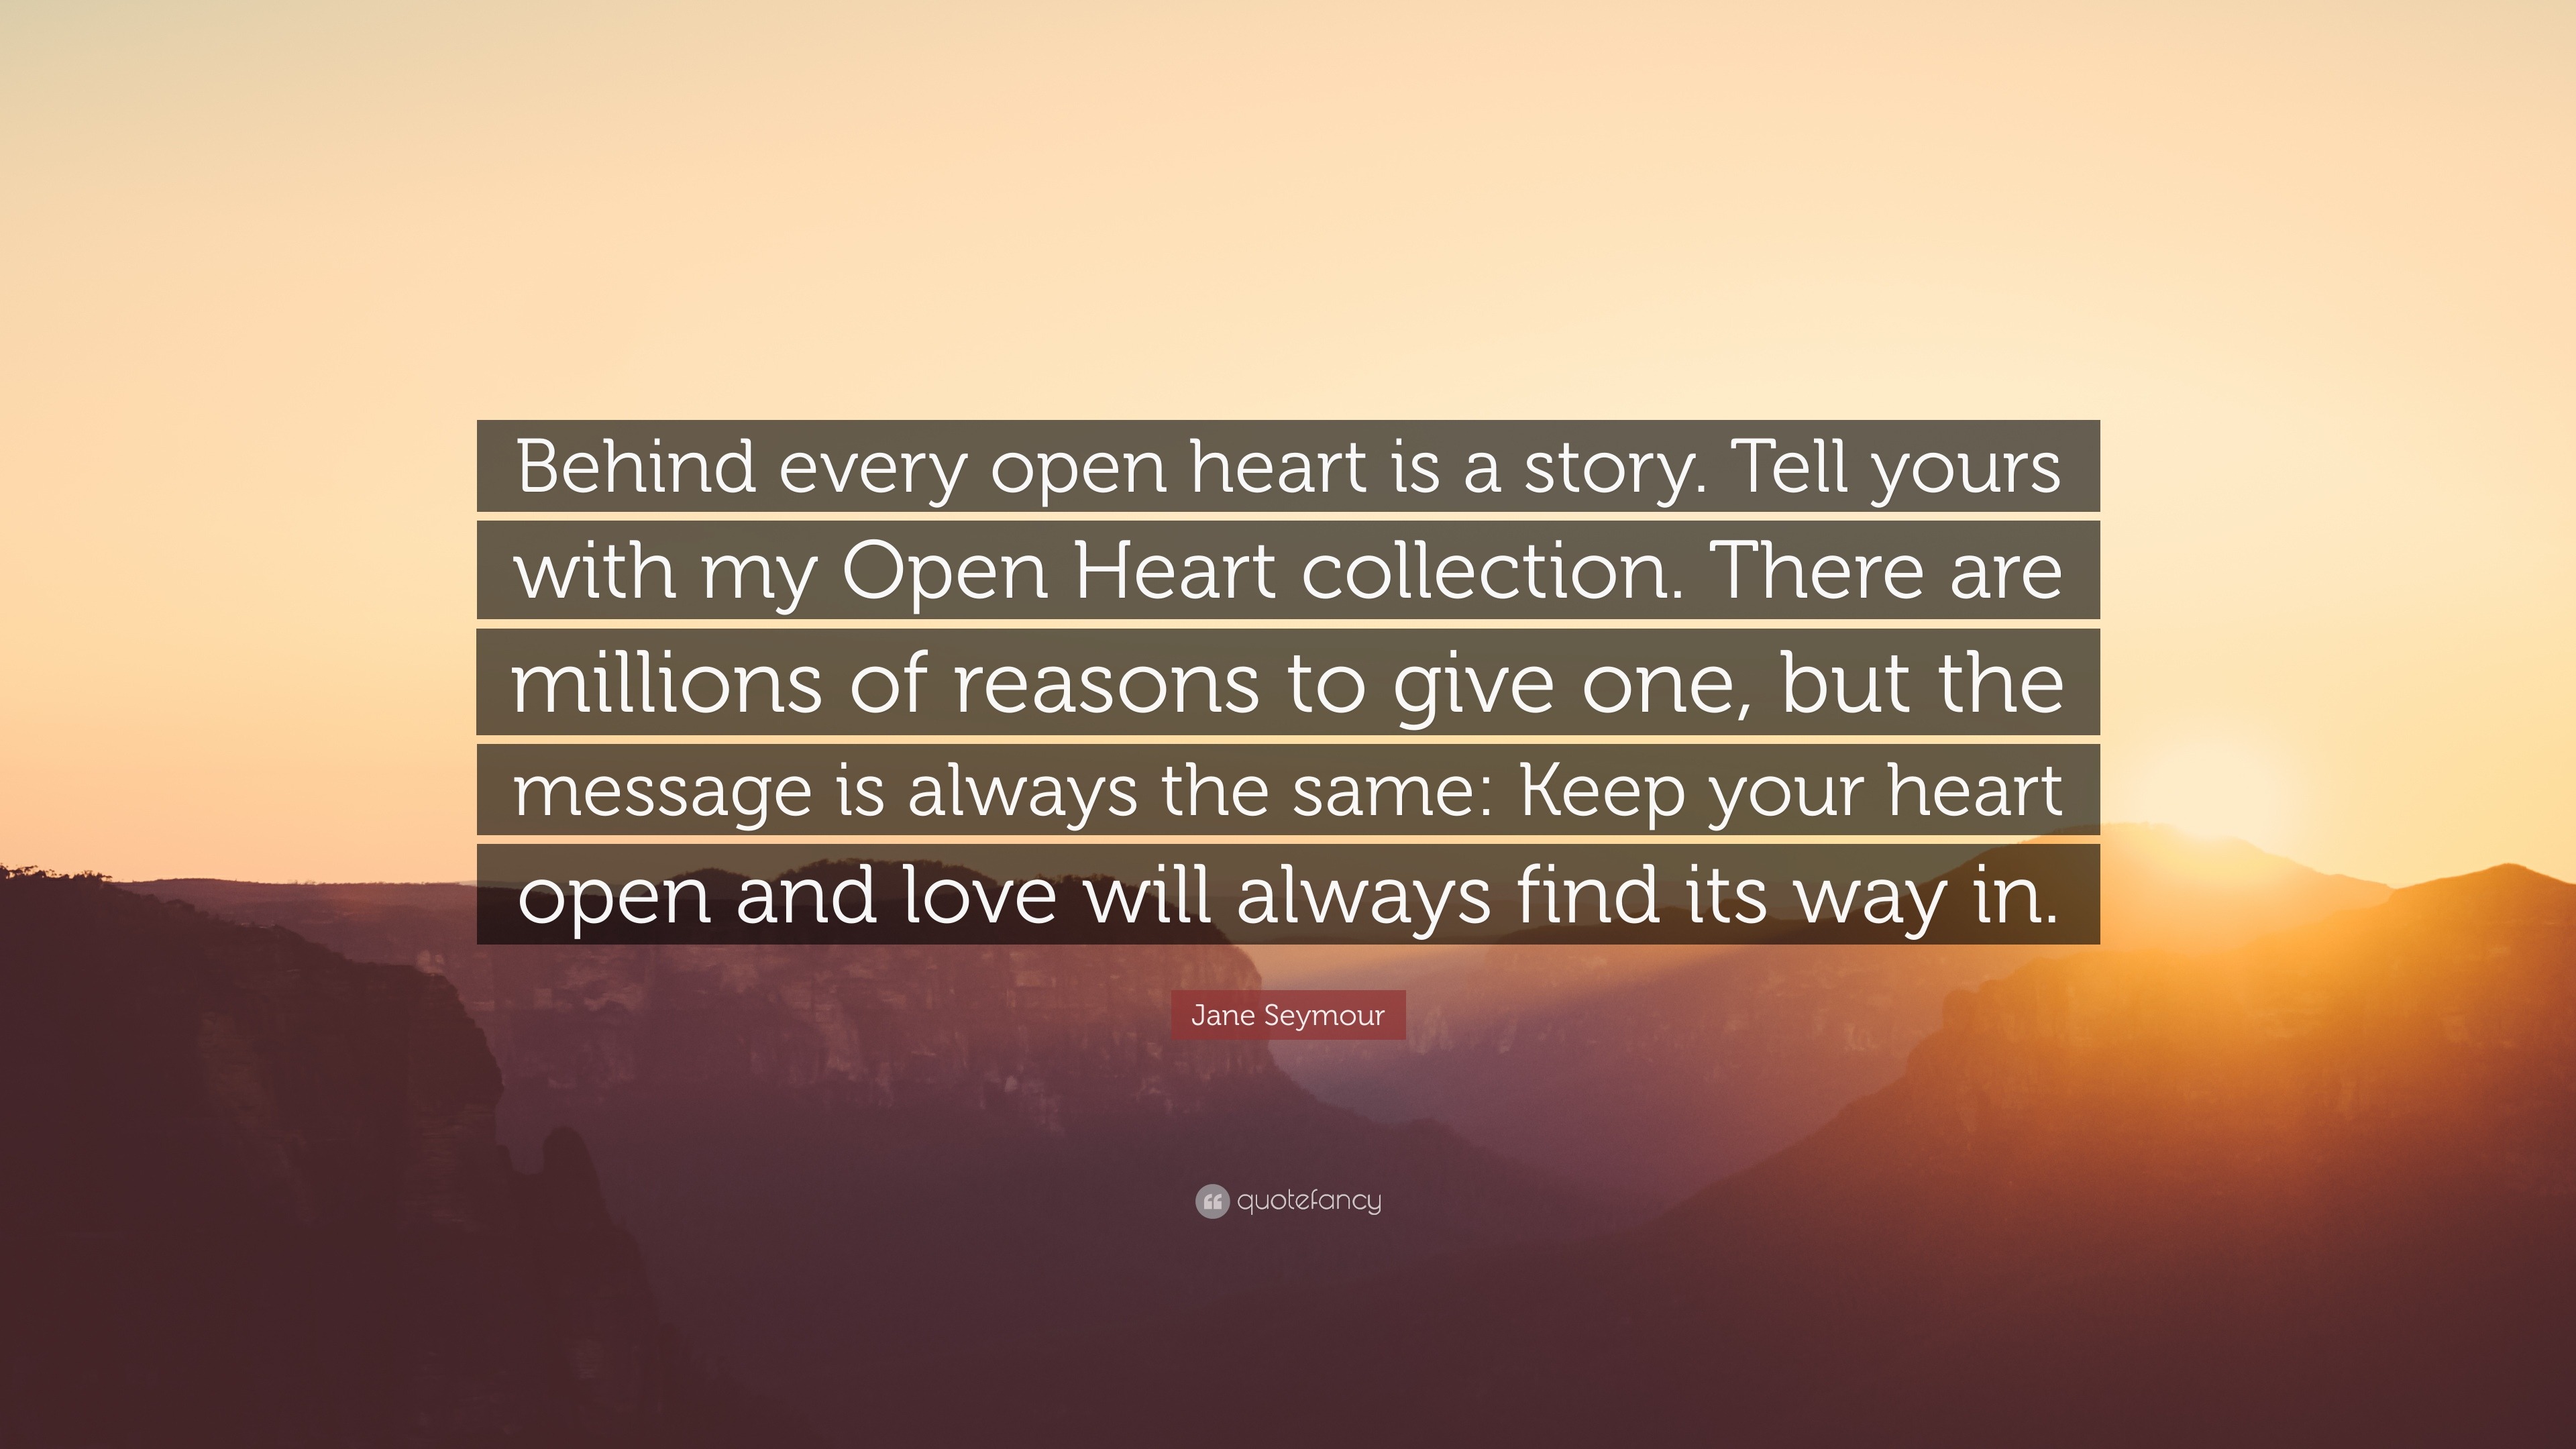 Jane Seymour Quote “Behind every open heart is a story Tell yours with